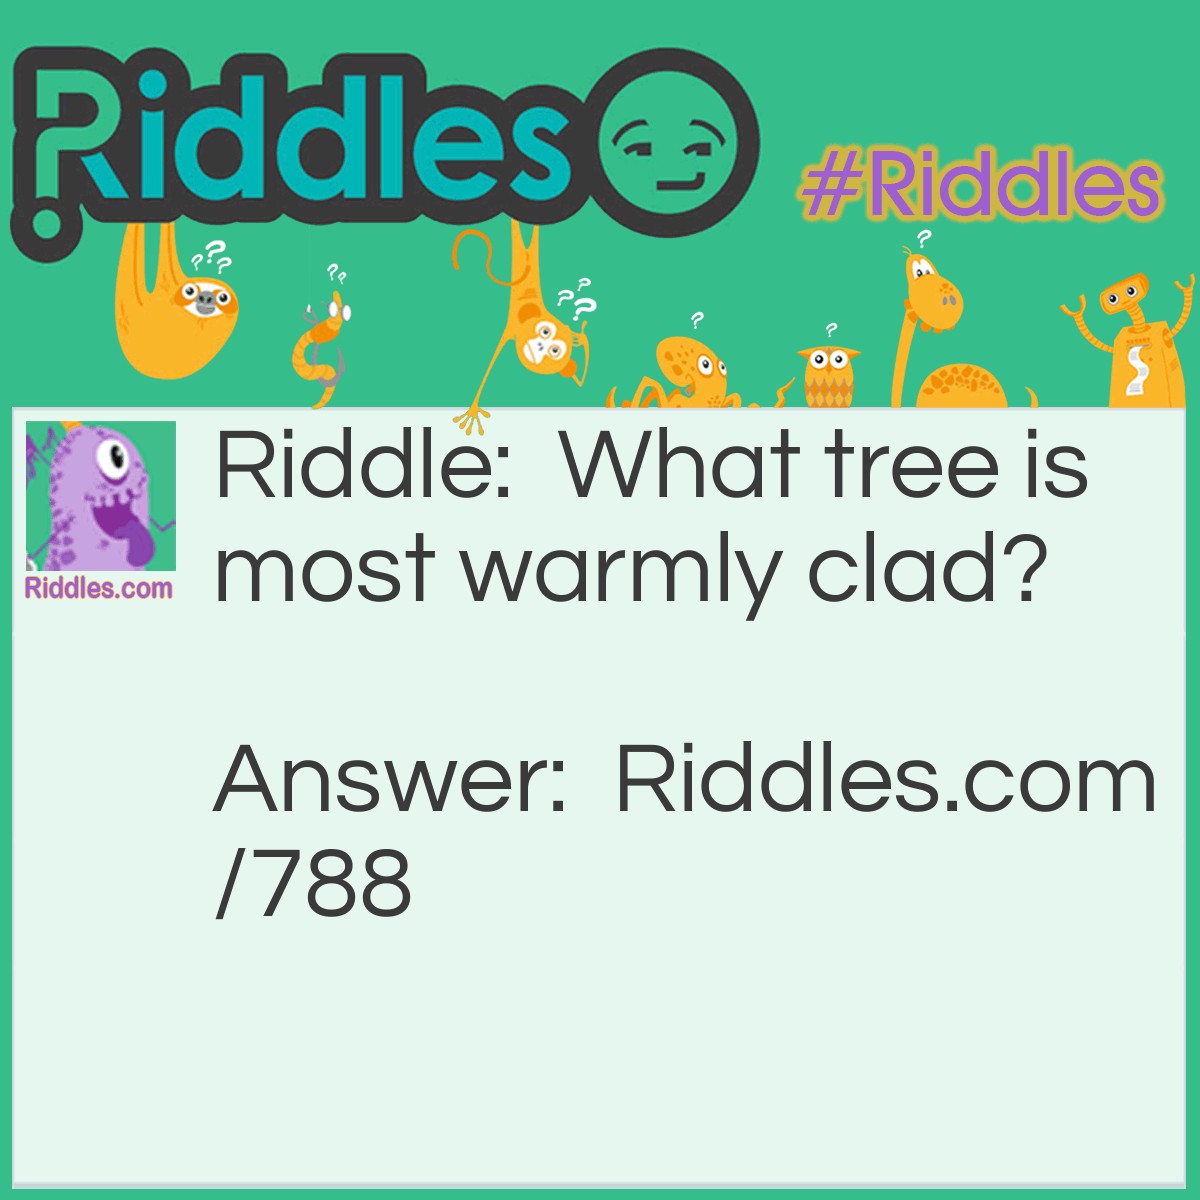 Riddle: What tree is most warmly clad? Answer: A Fir tree.